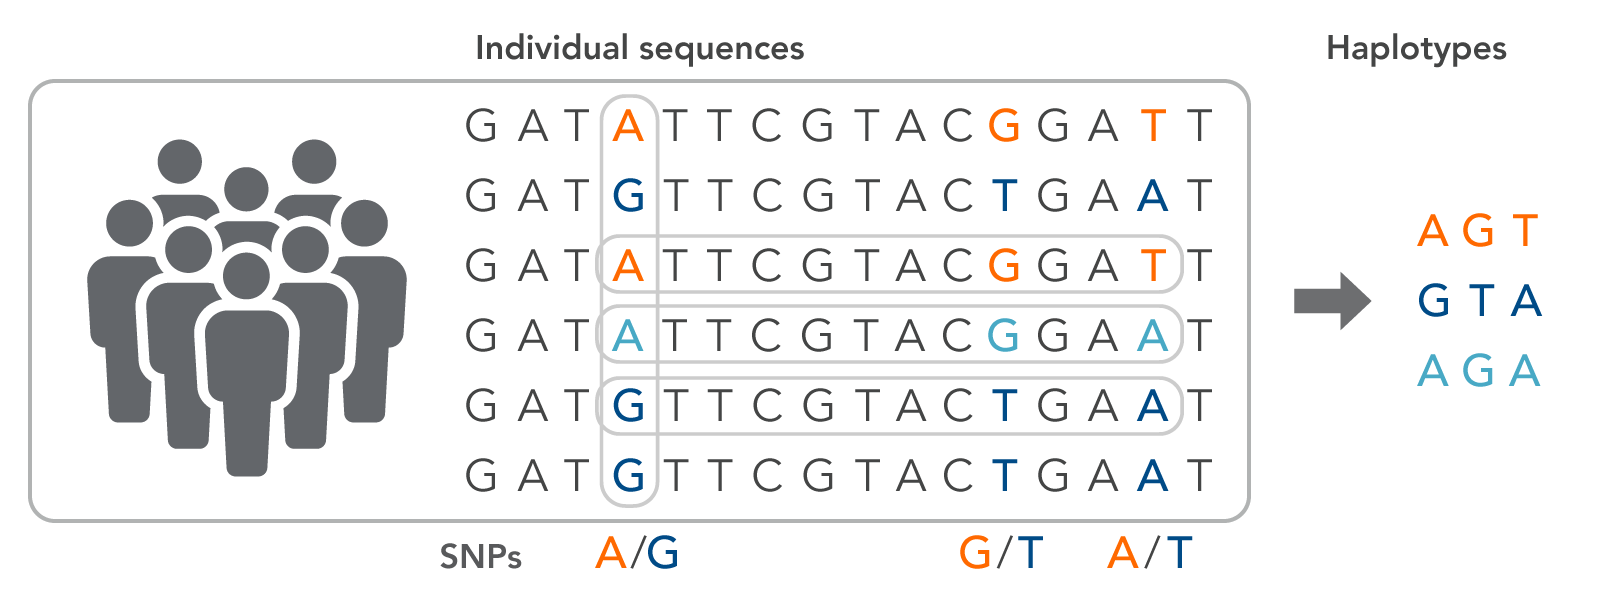 A haplotype is a series of adjacent SNPs in a genome.